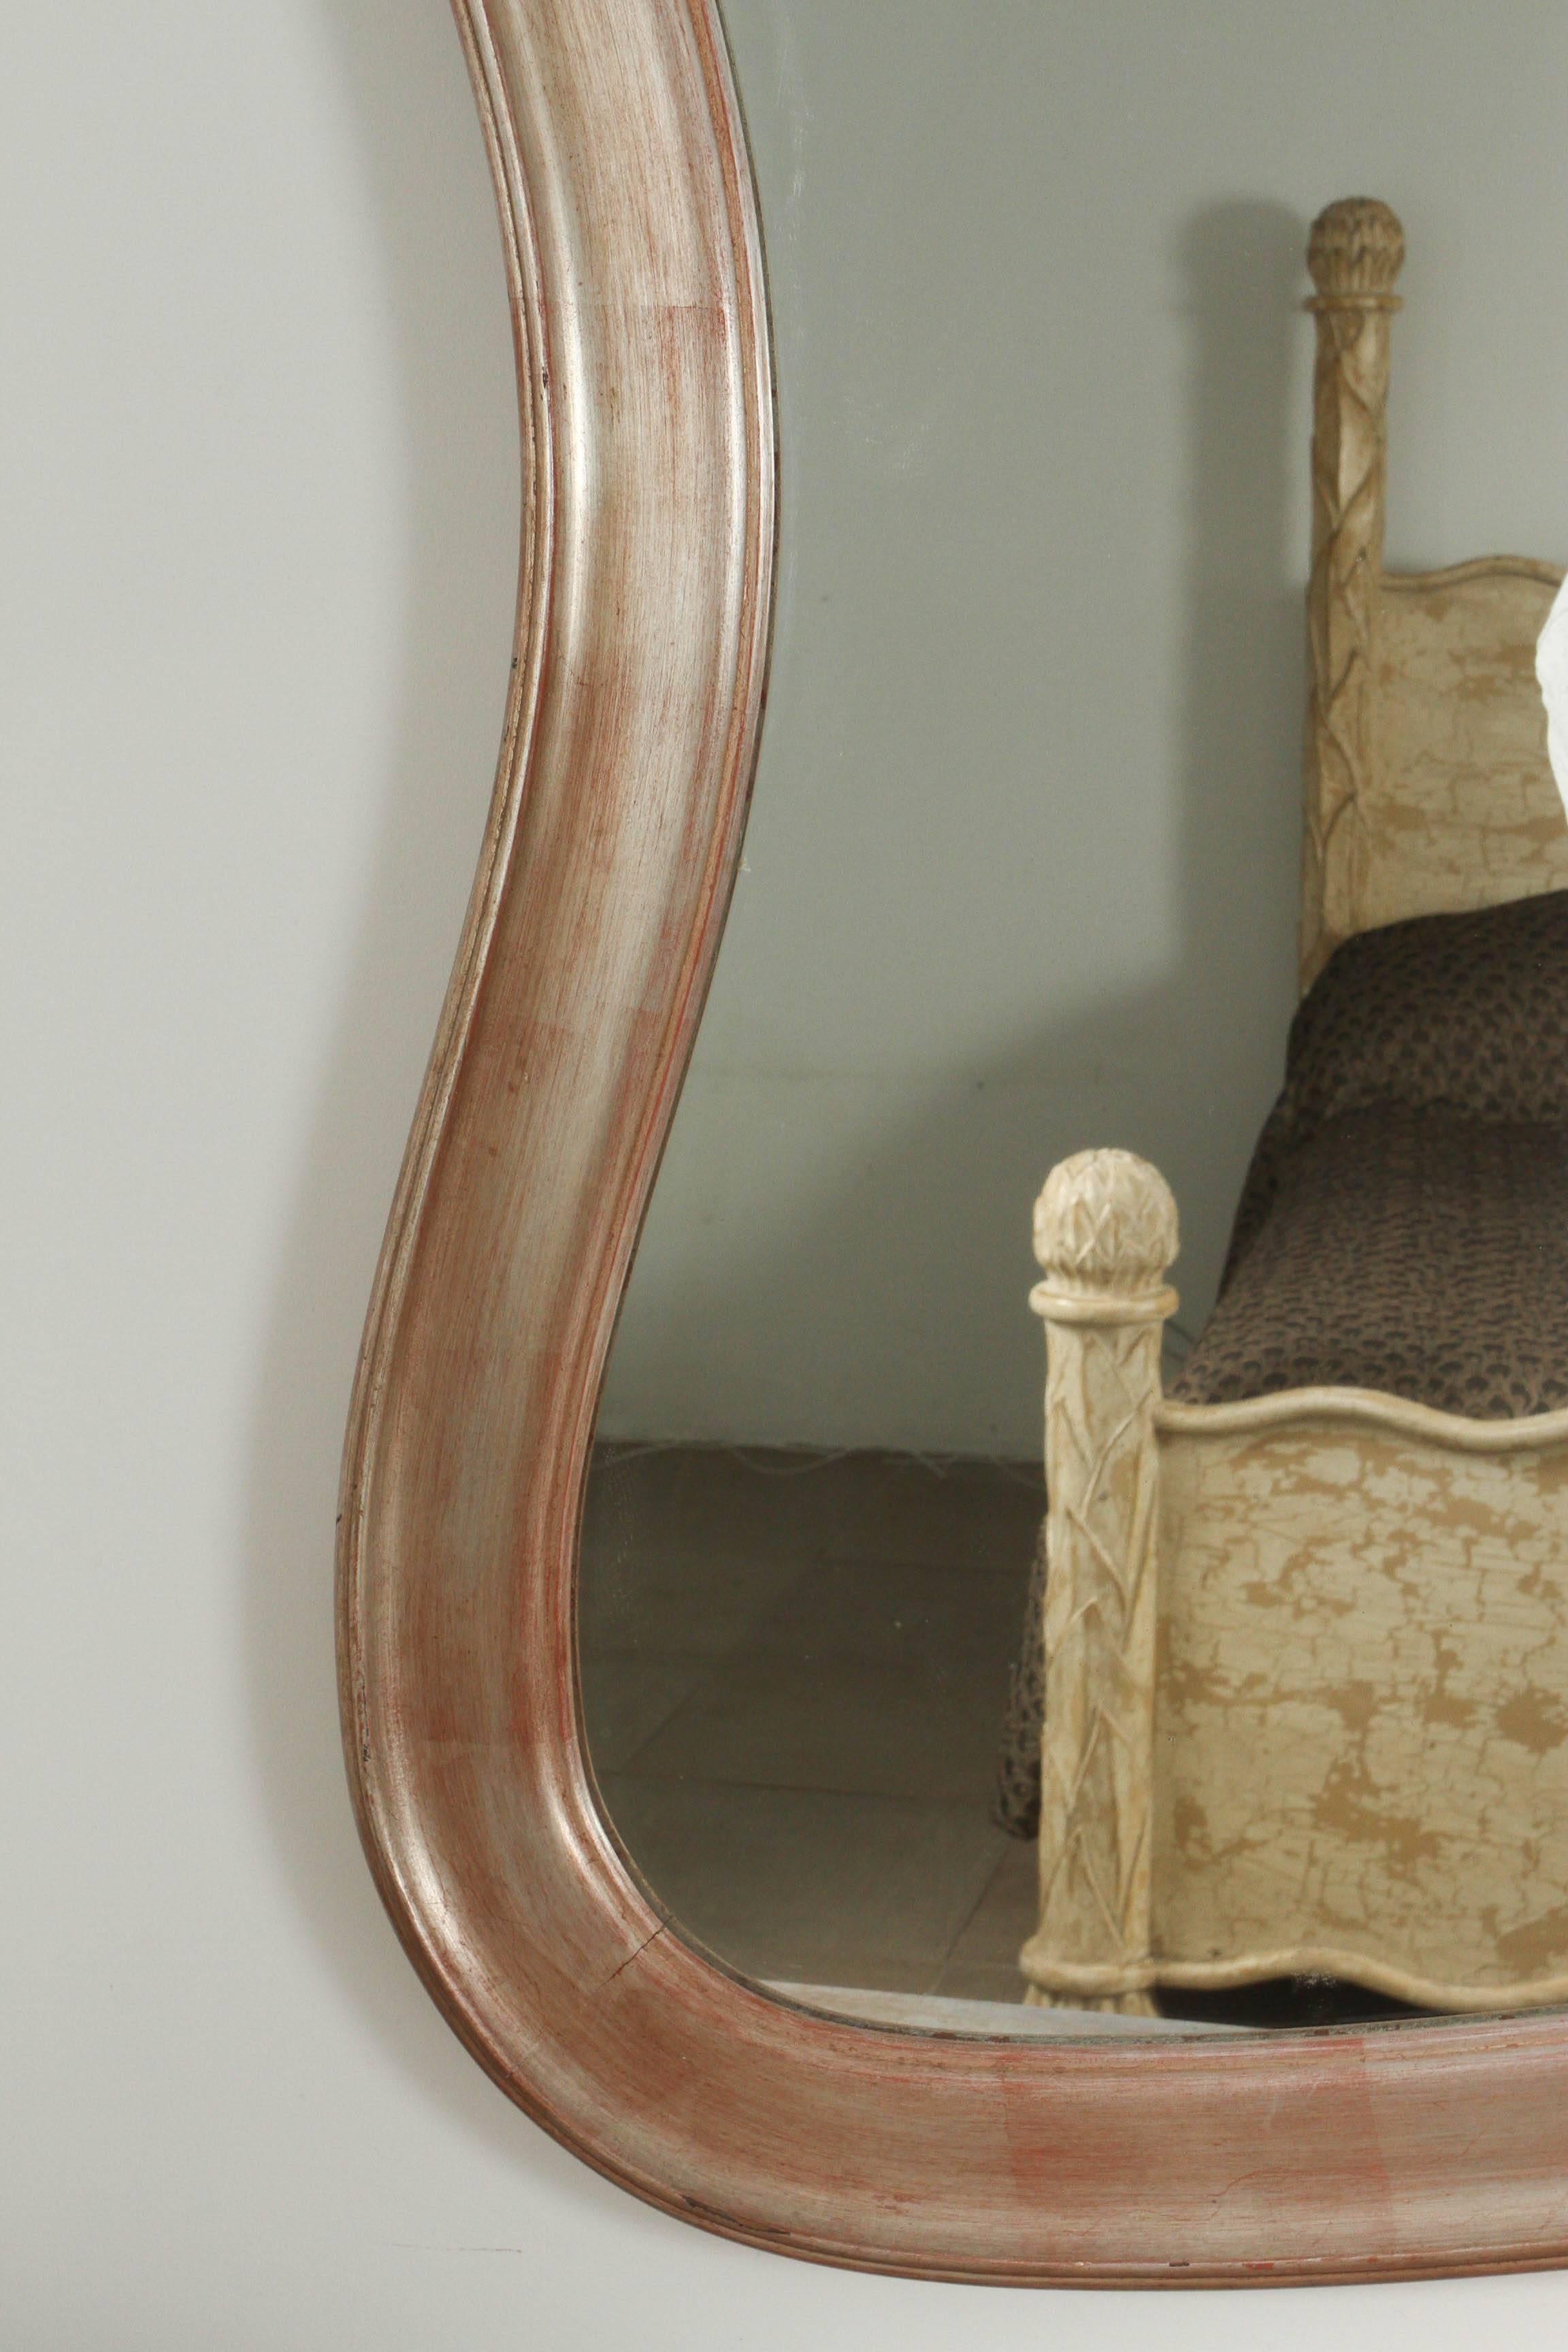 Rare Rococo modern mirror by James Mont.
This unusual mirror has an undulating frame retaining its original finish of silver leaf with a rosy overglaze.

 